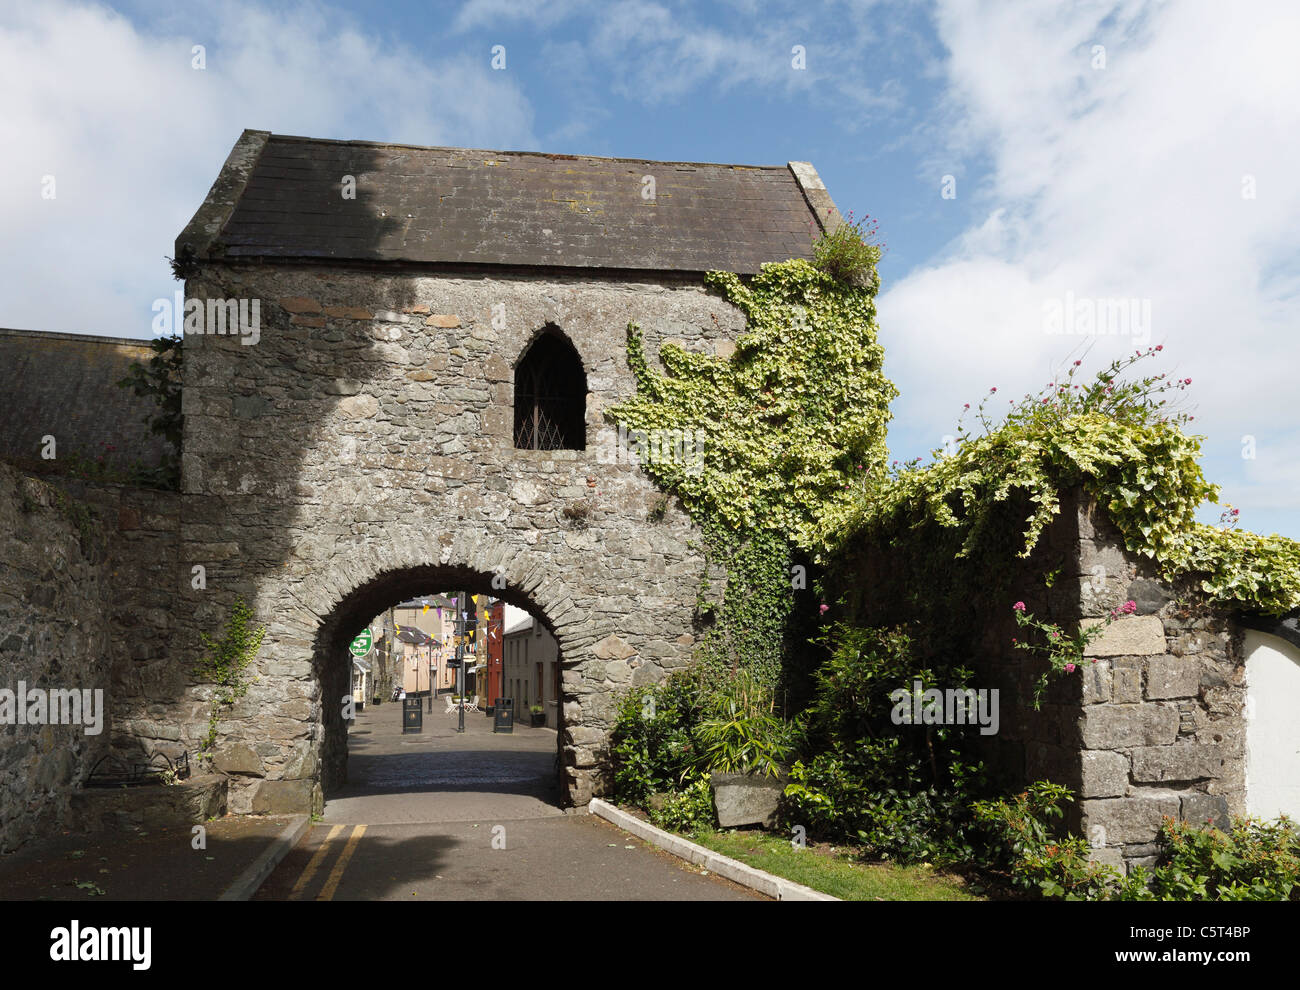 Republic of Ireland, County Louth, Cooley peninsula, Carlingford, View of Tholsel city gate Stock Photo